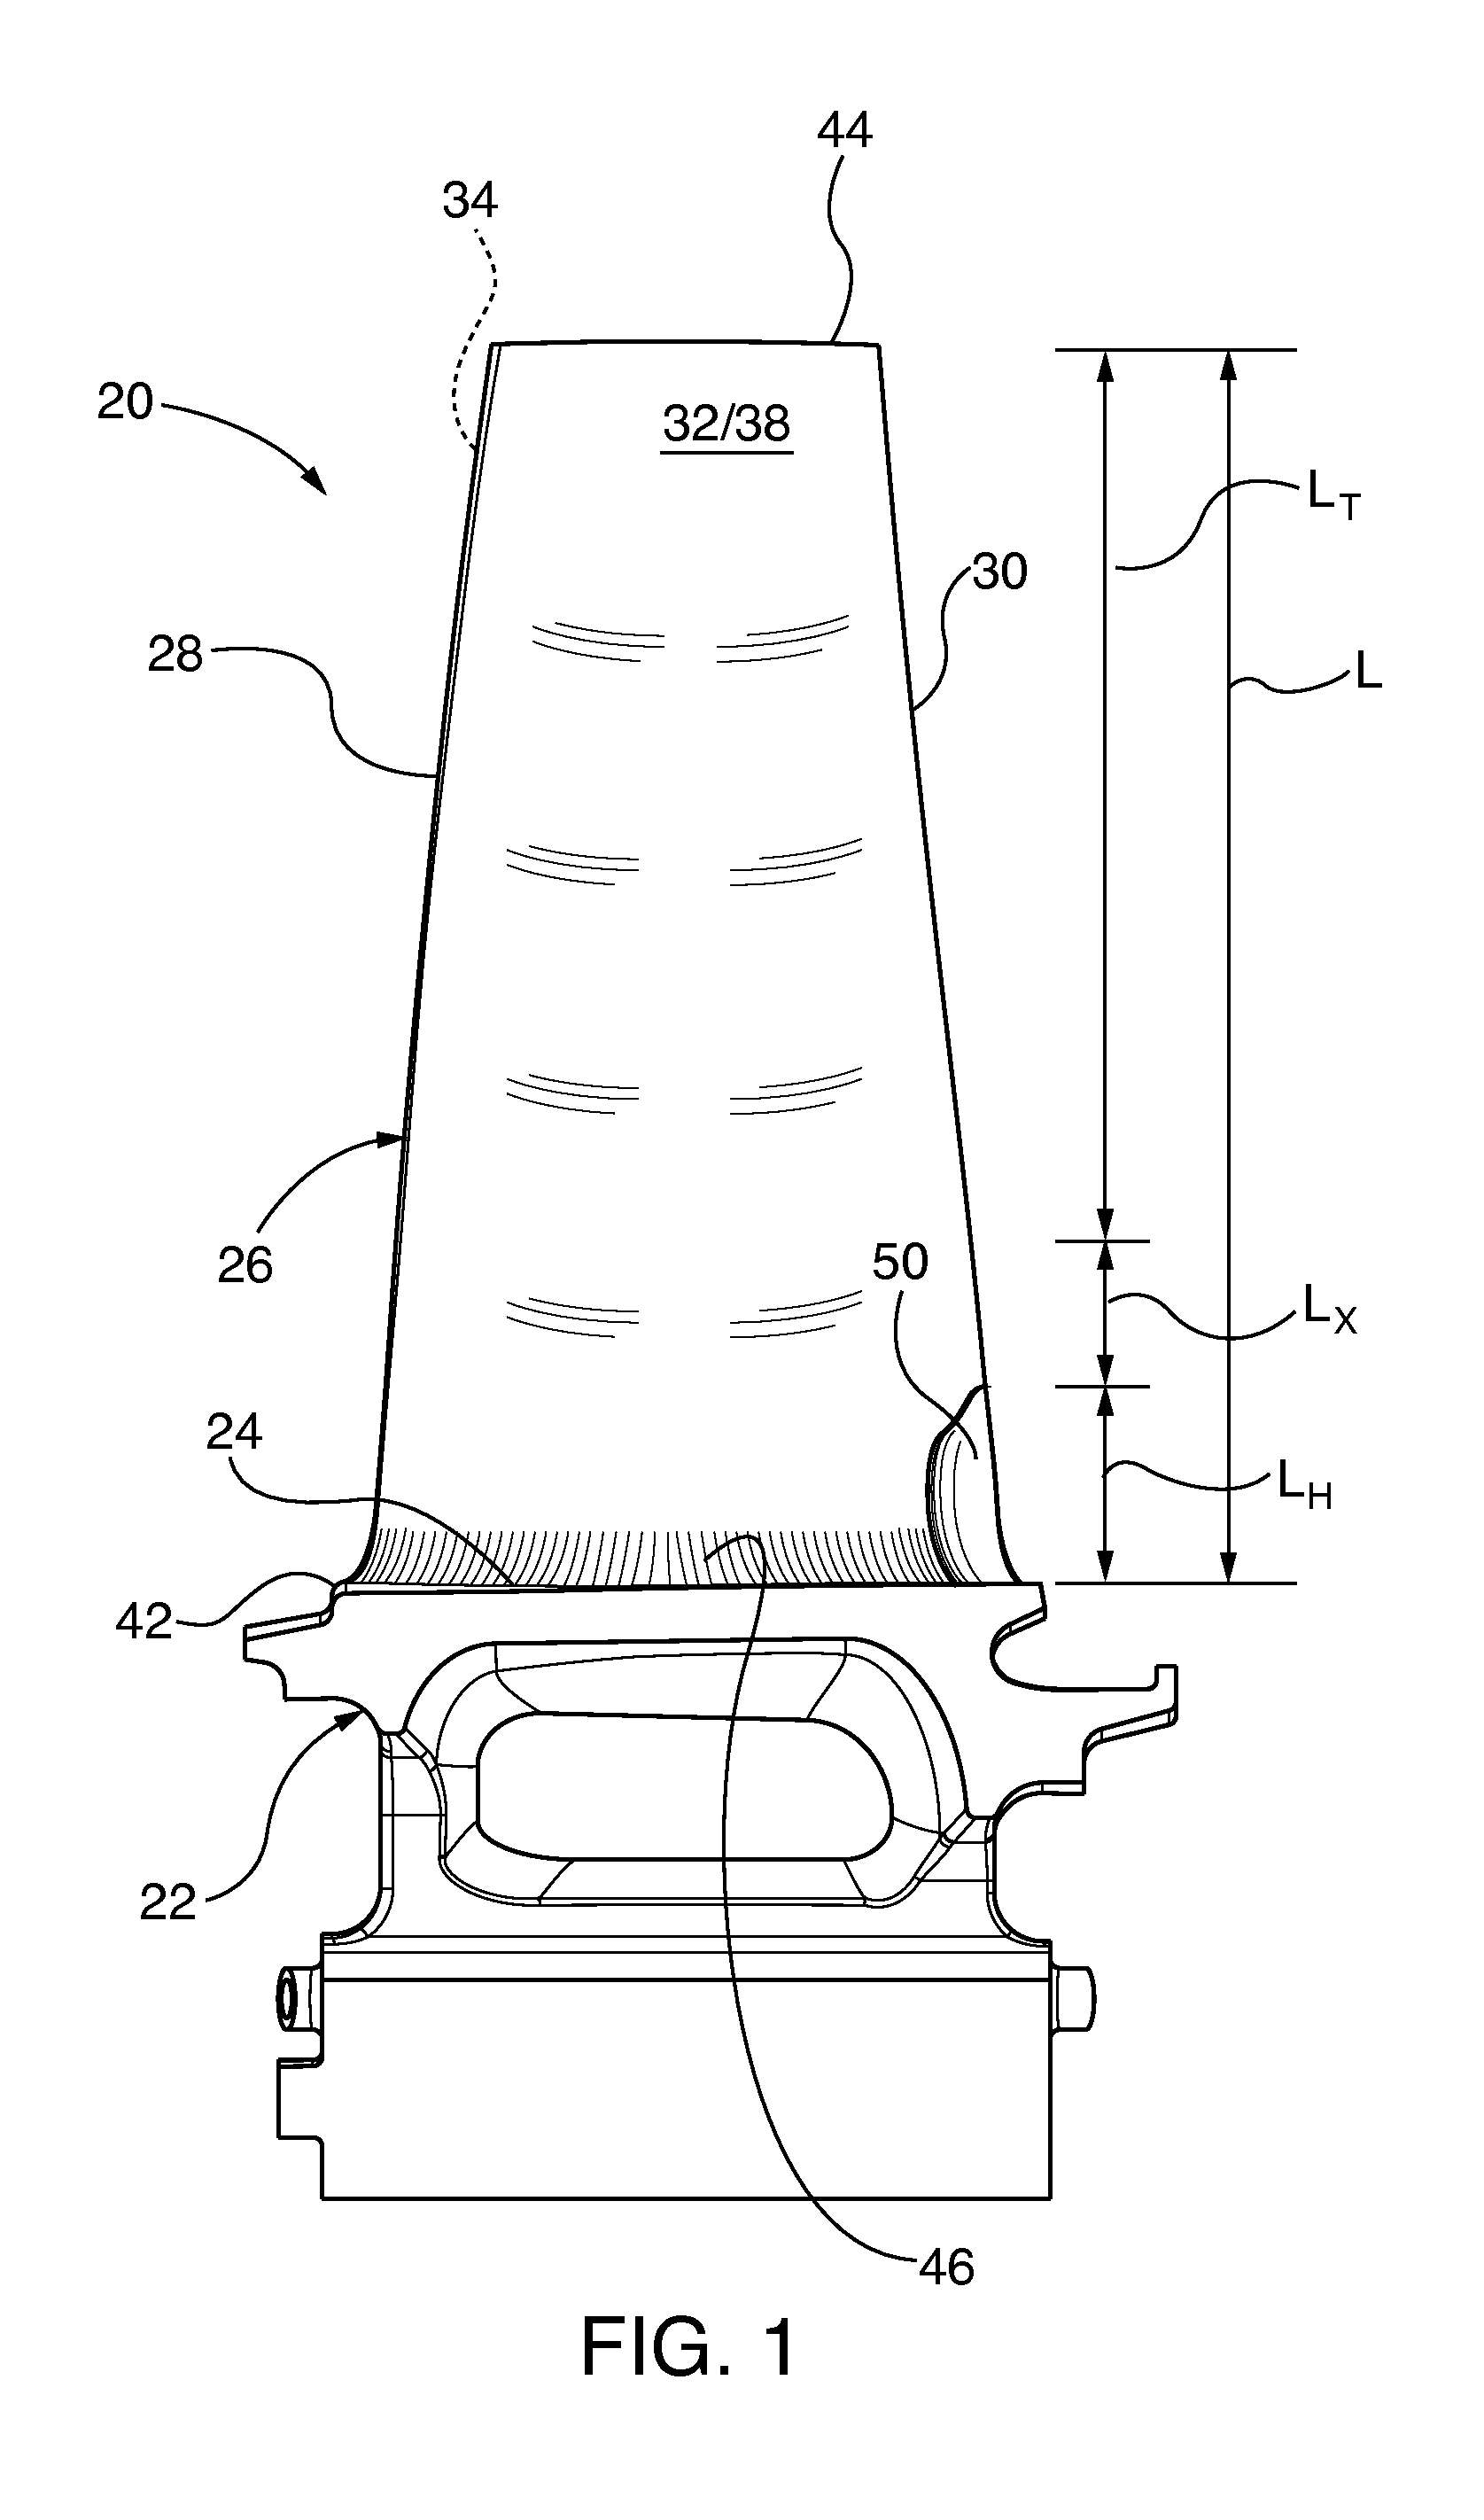 Gas turbine engine blade with increased wall thickness zone in the trailing edge-hub region